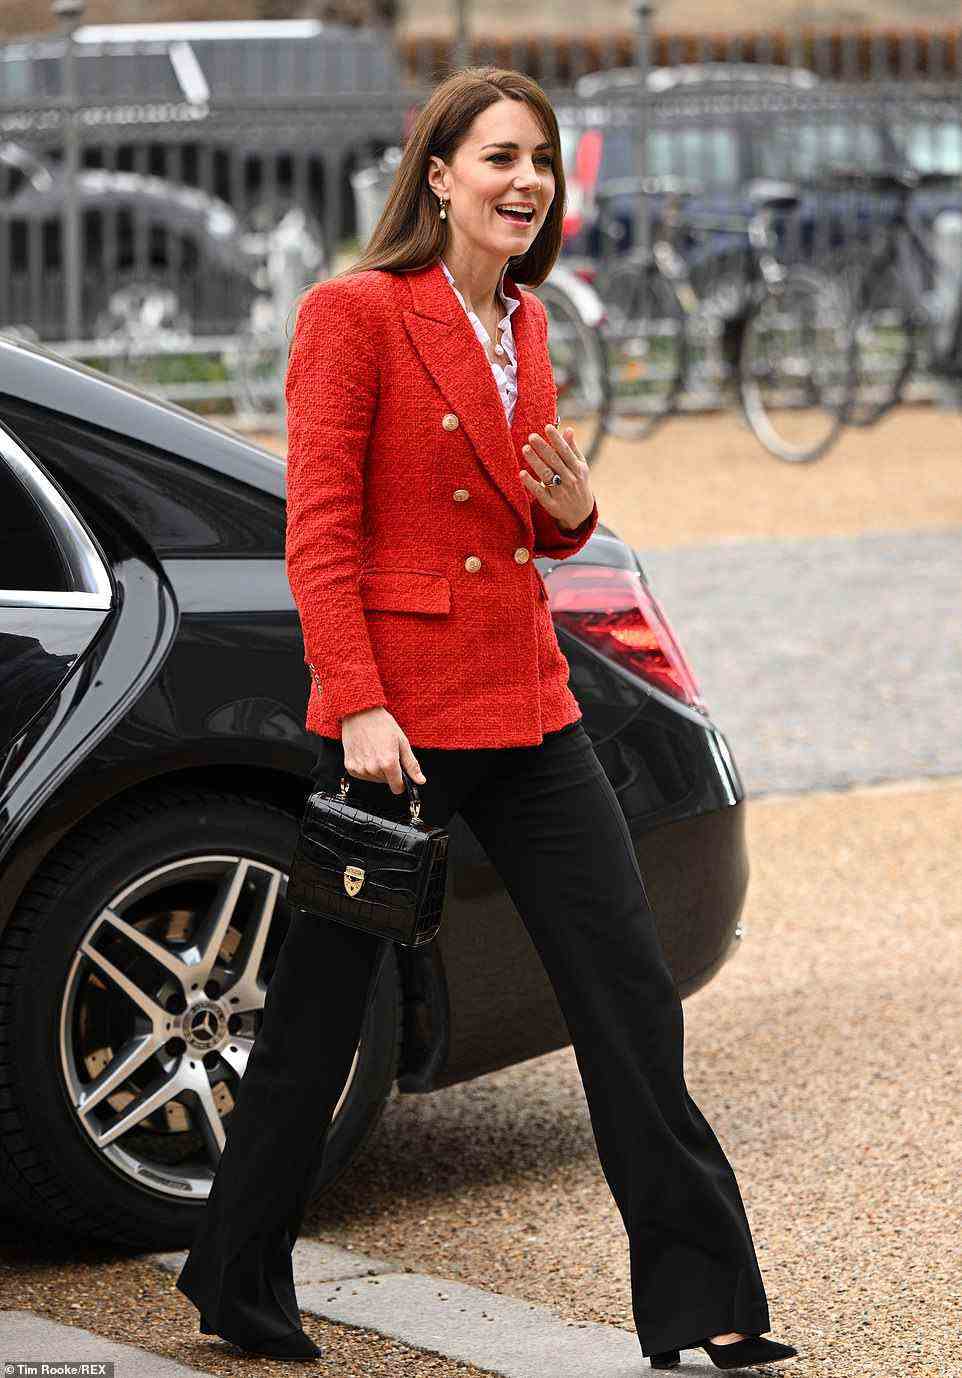 The Duchess of Cambridge put her best foot forward in a pair of black suede heels with chunky heels for the engagement